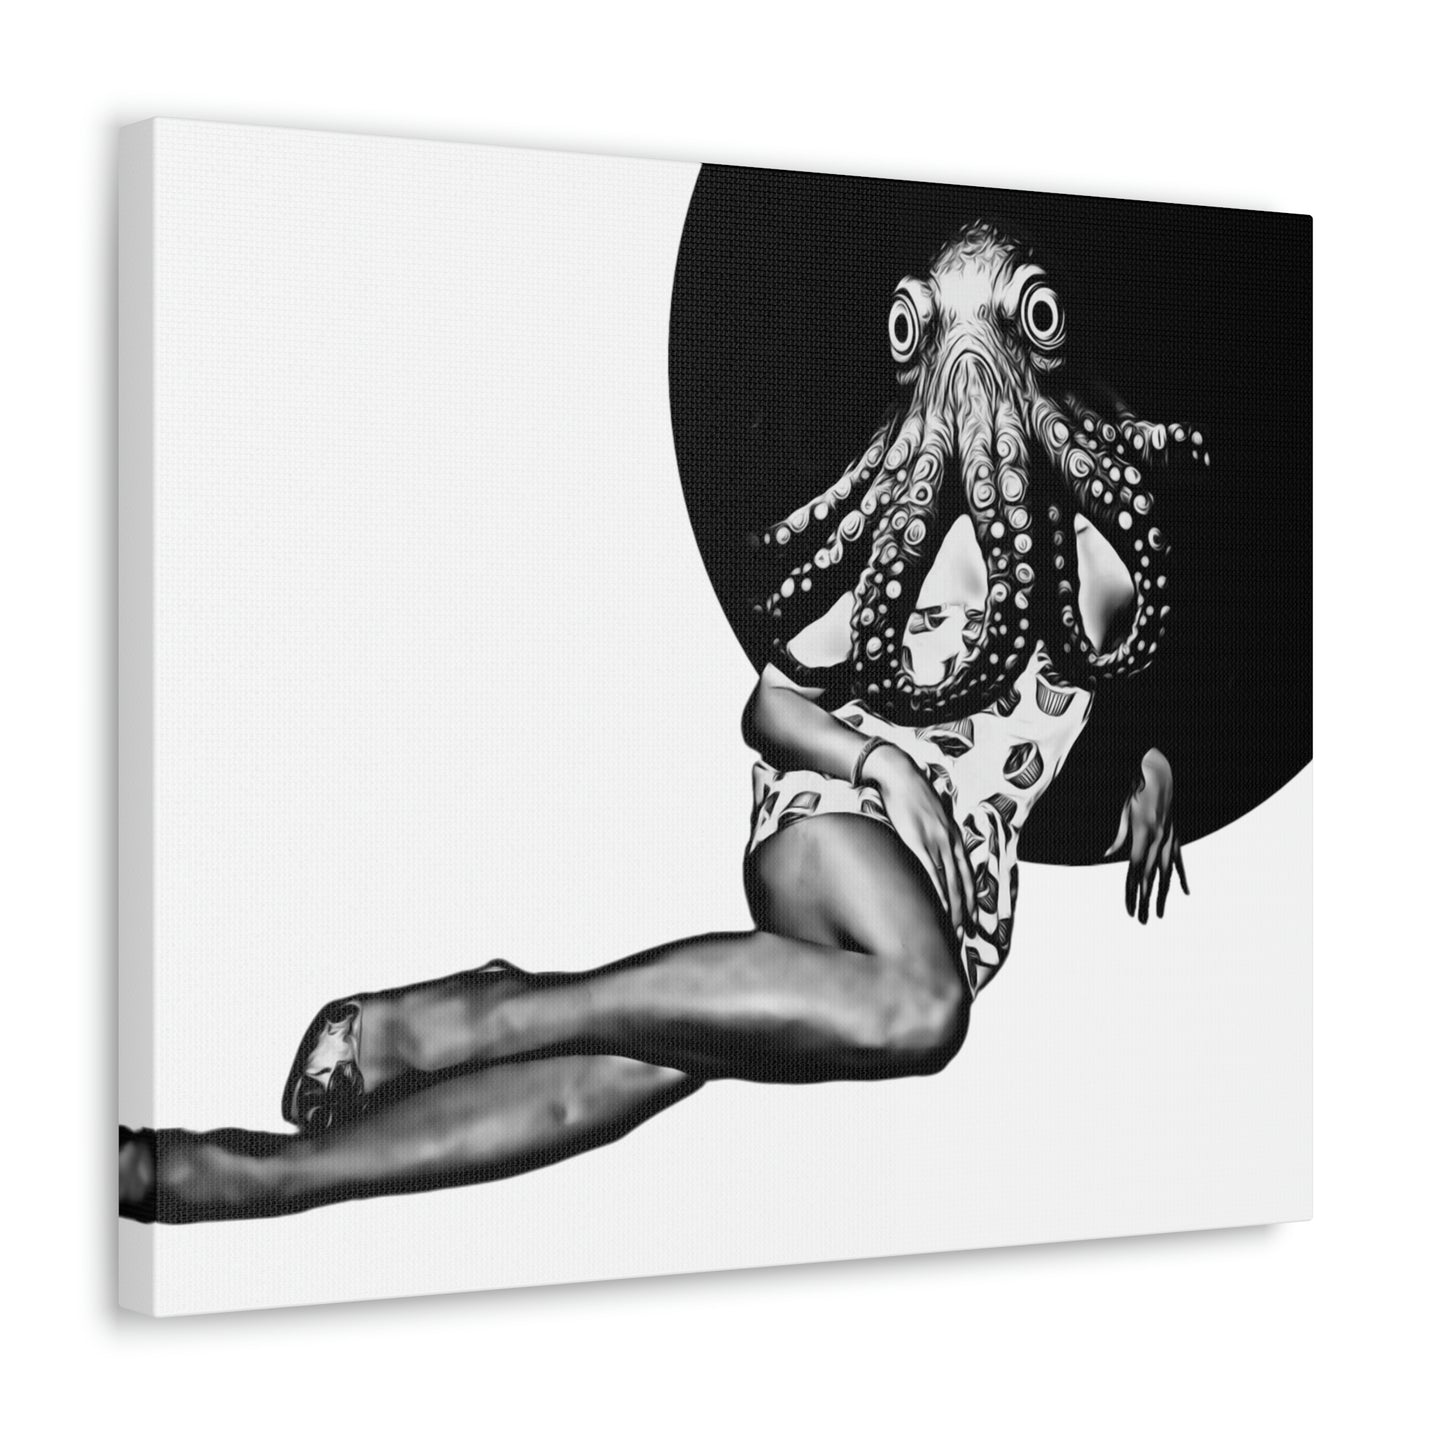 Art Work Collection - Canvas Gallery Wraps - OctoGirl v2